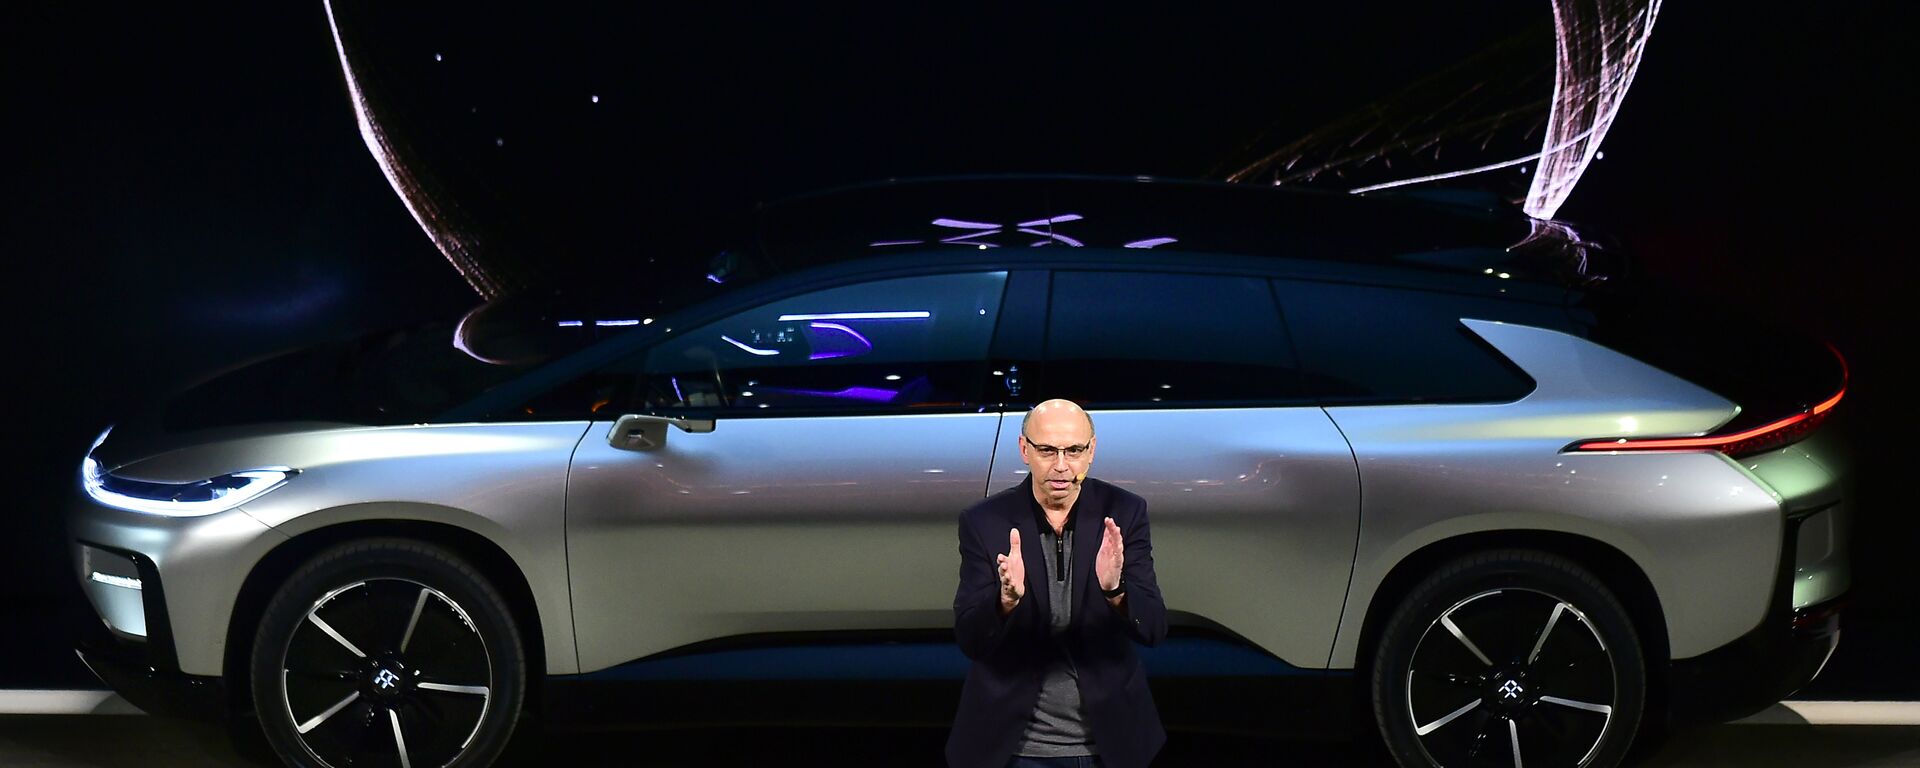 araday Future's Nick Sampson, SVP of R&D + Engineering speaks in front of the just introduced FF91 electric vehicle at the company's press conference at the 2017 Consumer Electronics Show in Las Vegas, January, 2016. - Sputnik International, 1920, 21.10.2023